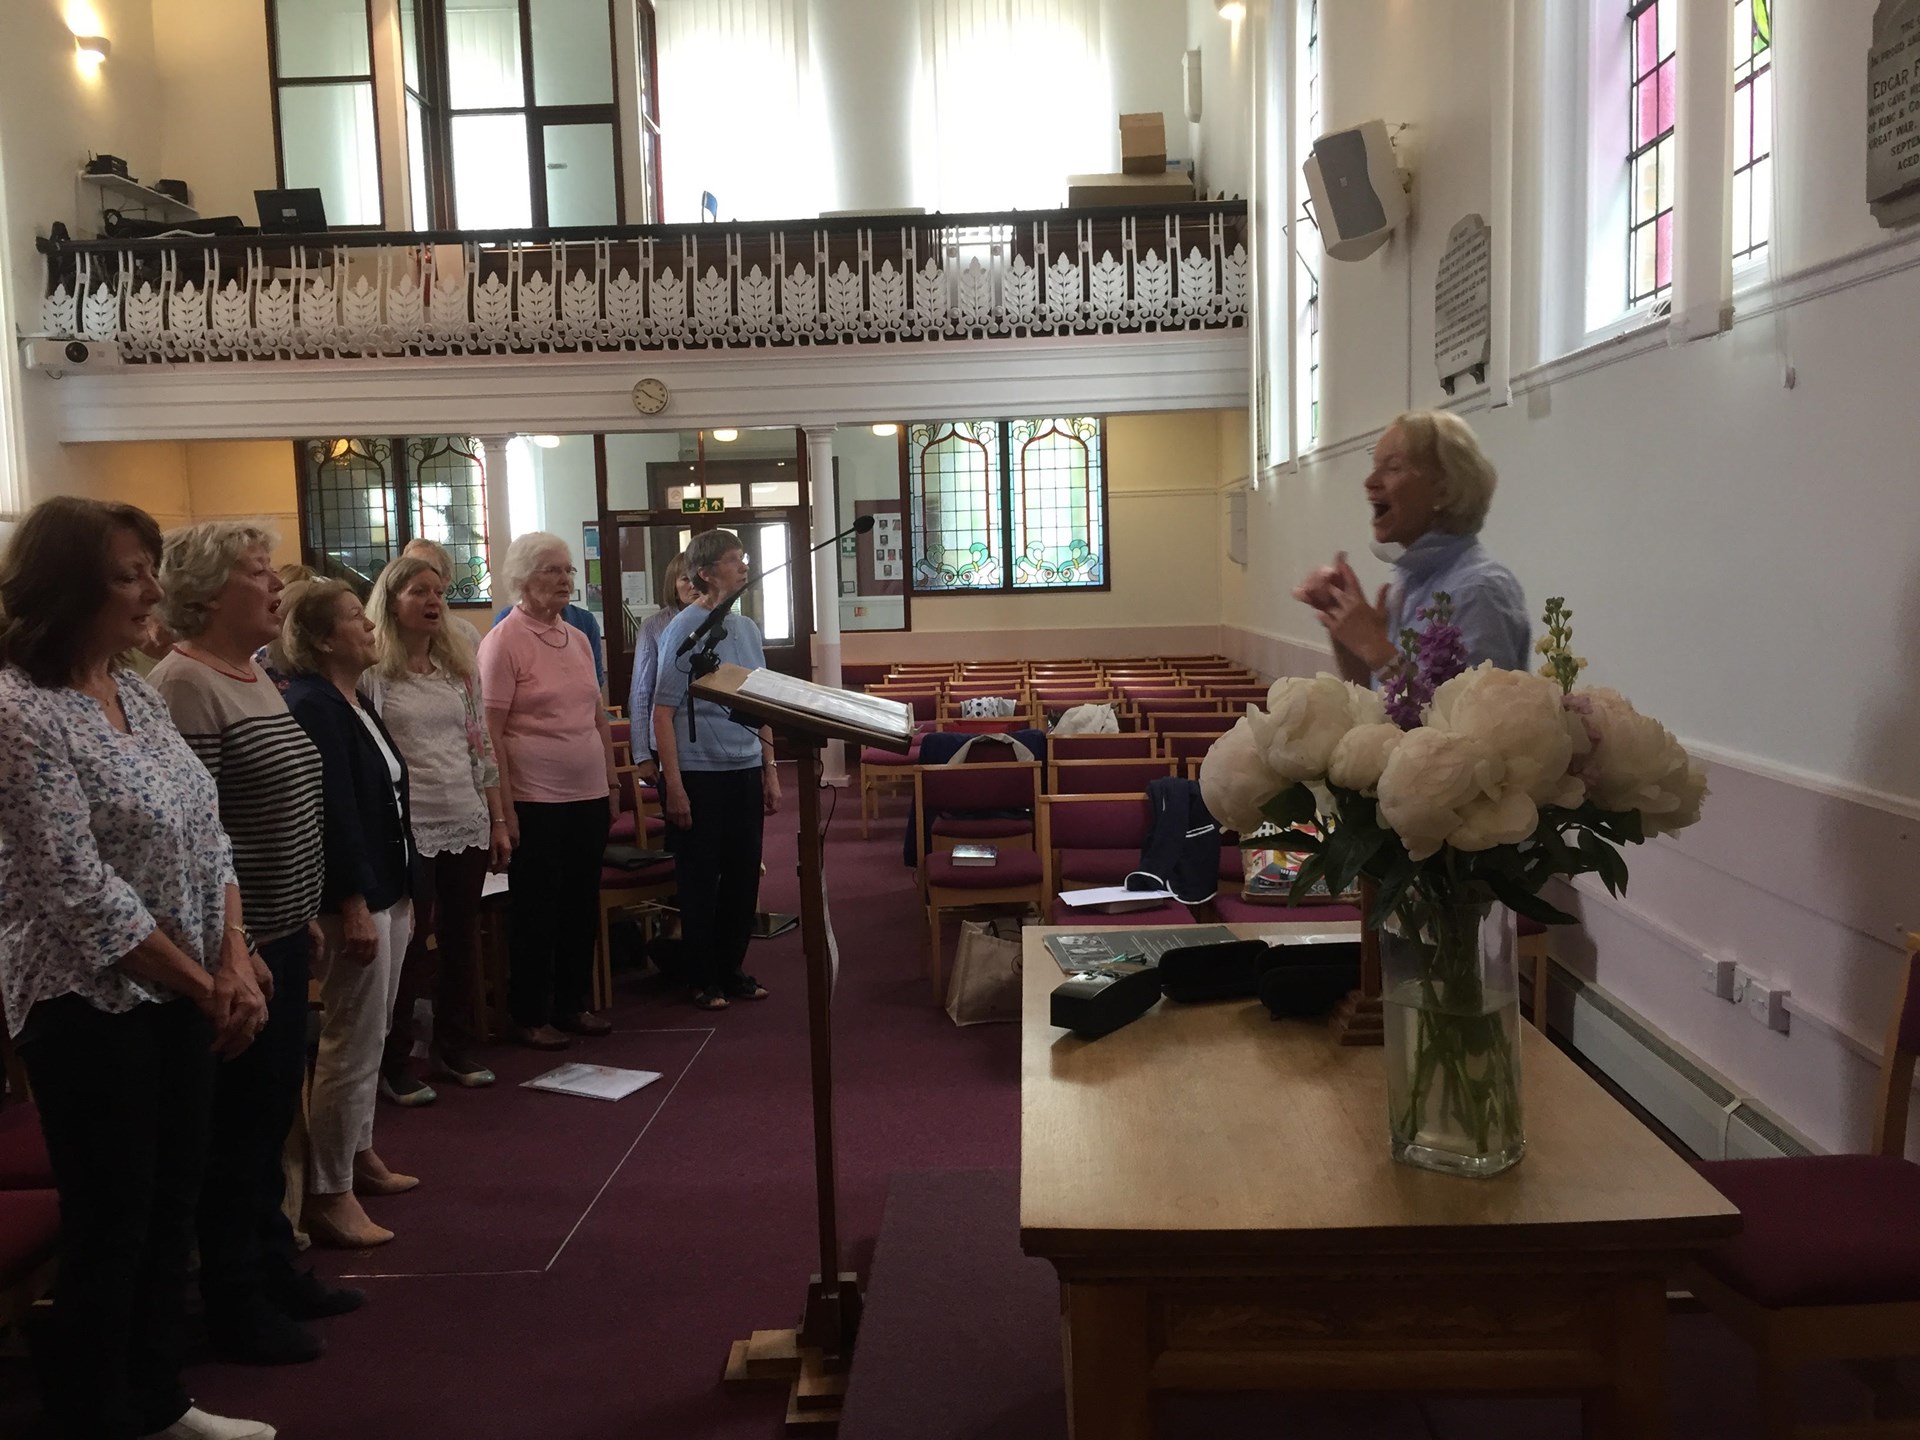 2018 - rehearsing in the church in Bell Street